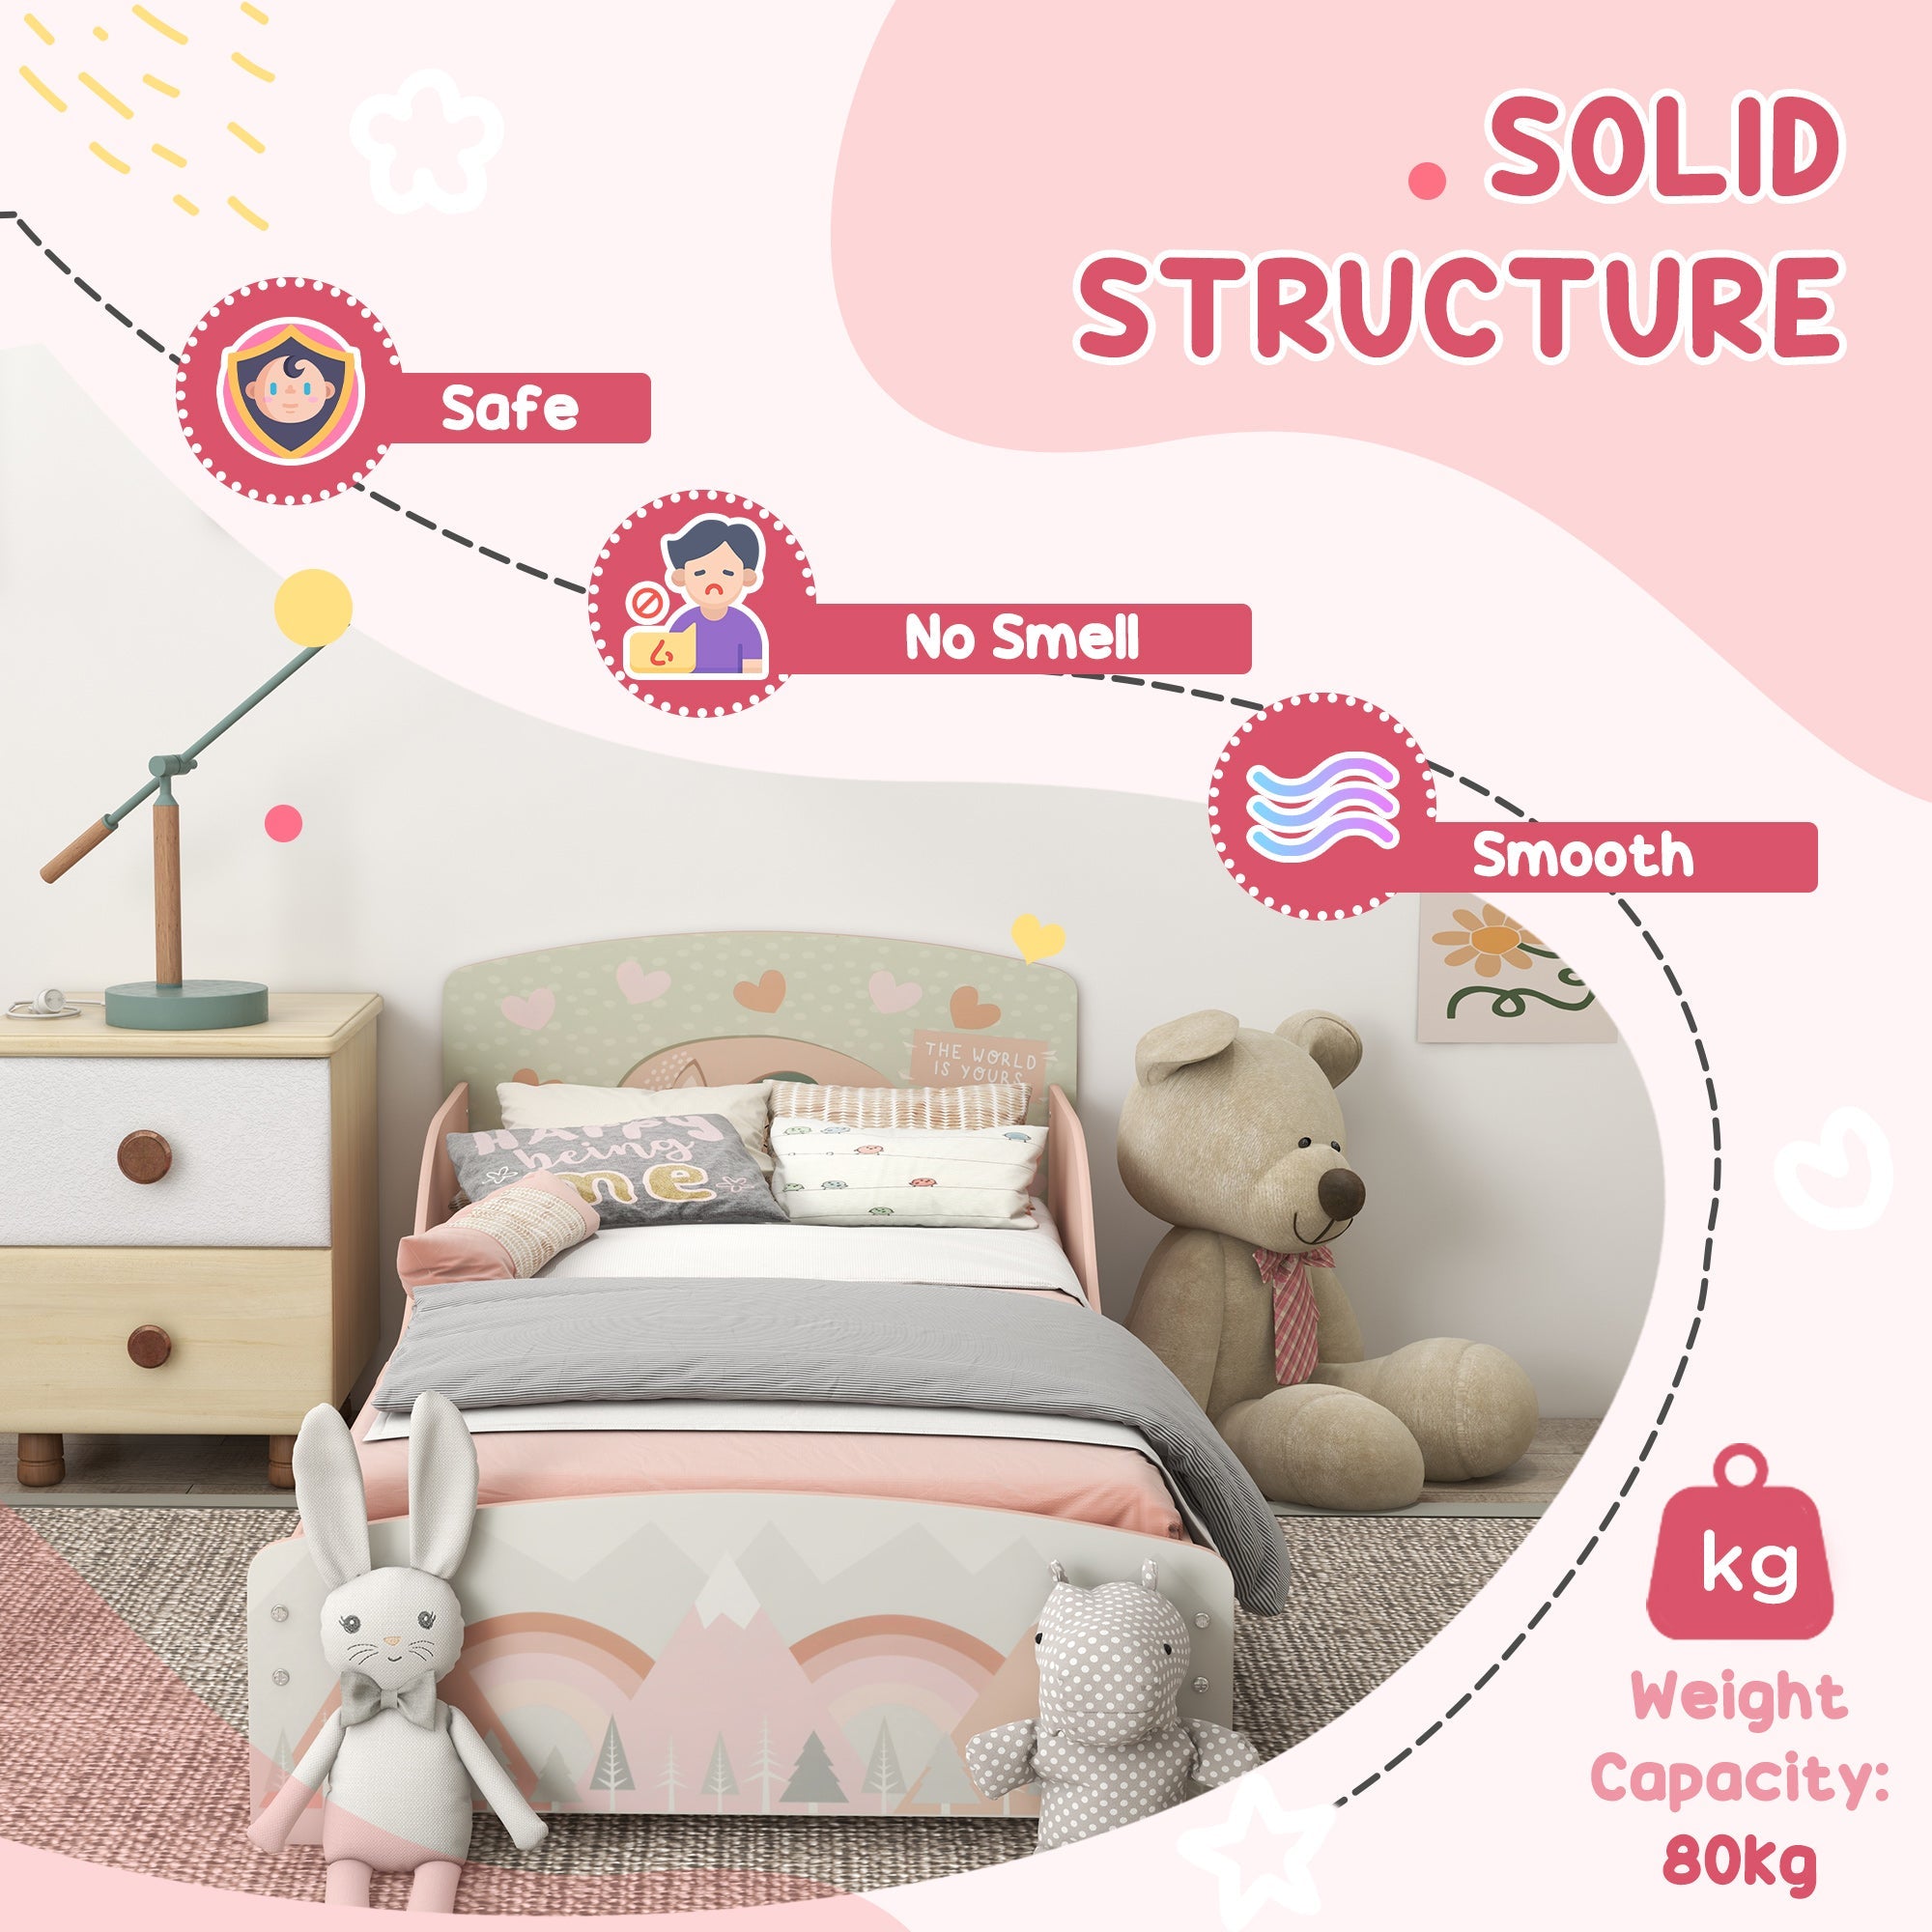 Toddler Bed Frame, Kids Dressing Table with Mirror and Stool, Cute Animal Design Kids Bedroom Furniture Set for Ages 3-6 Years, Pink-3